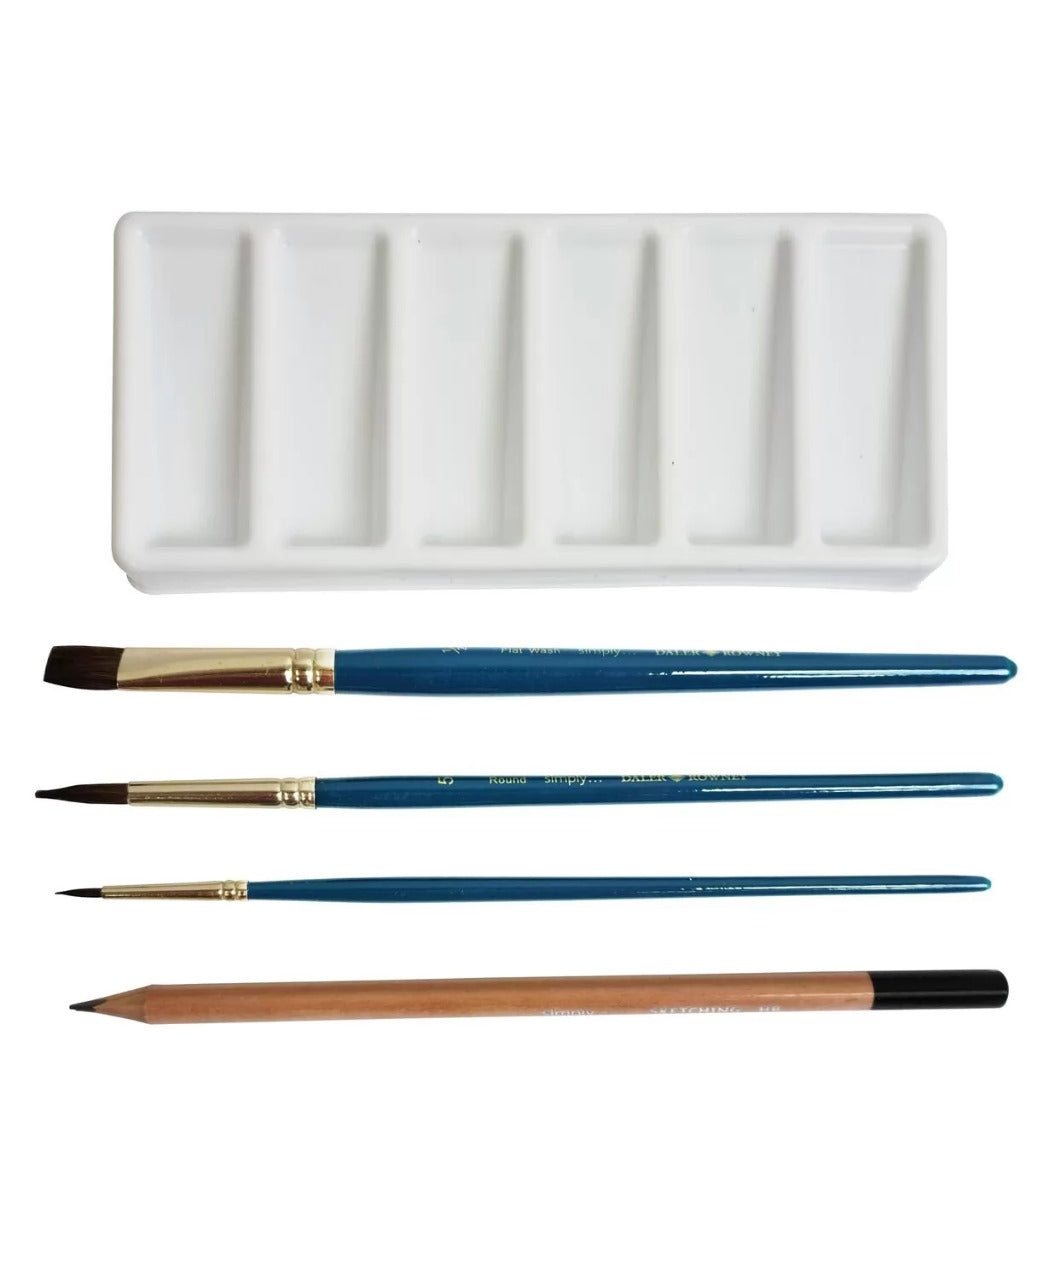 Daler-Rowney Simply Watercolor Painting Set Of 25